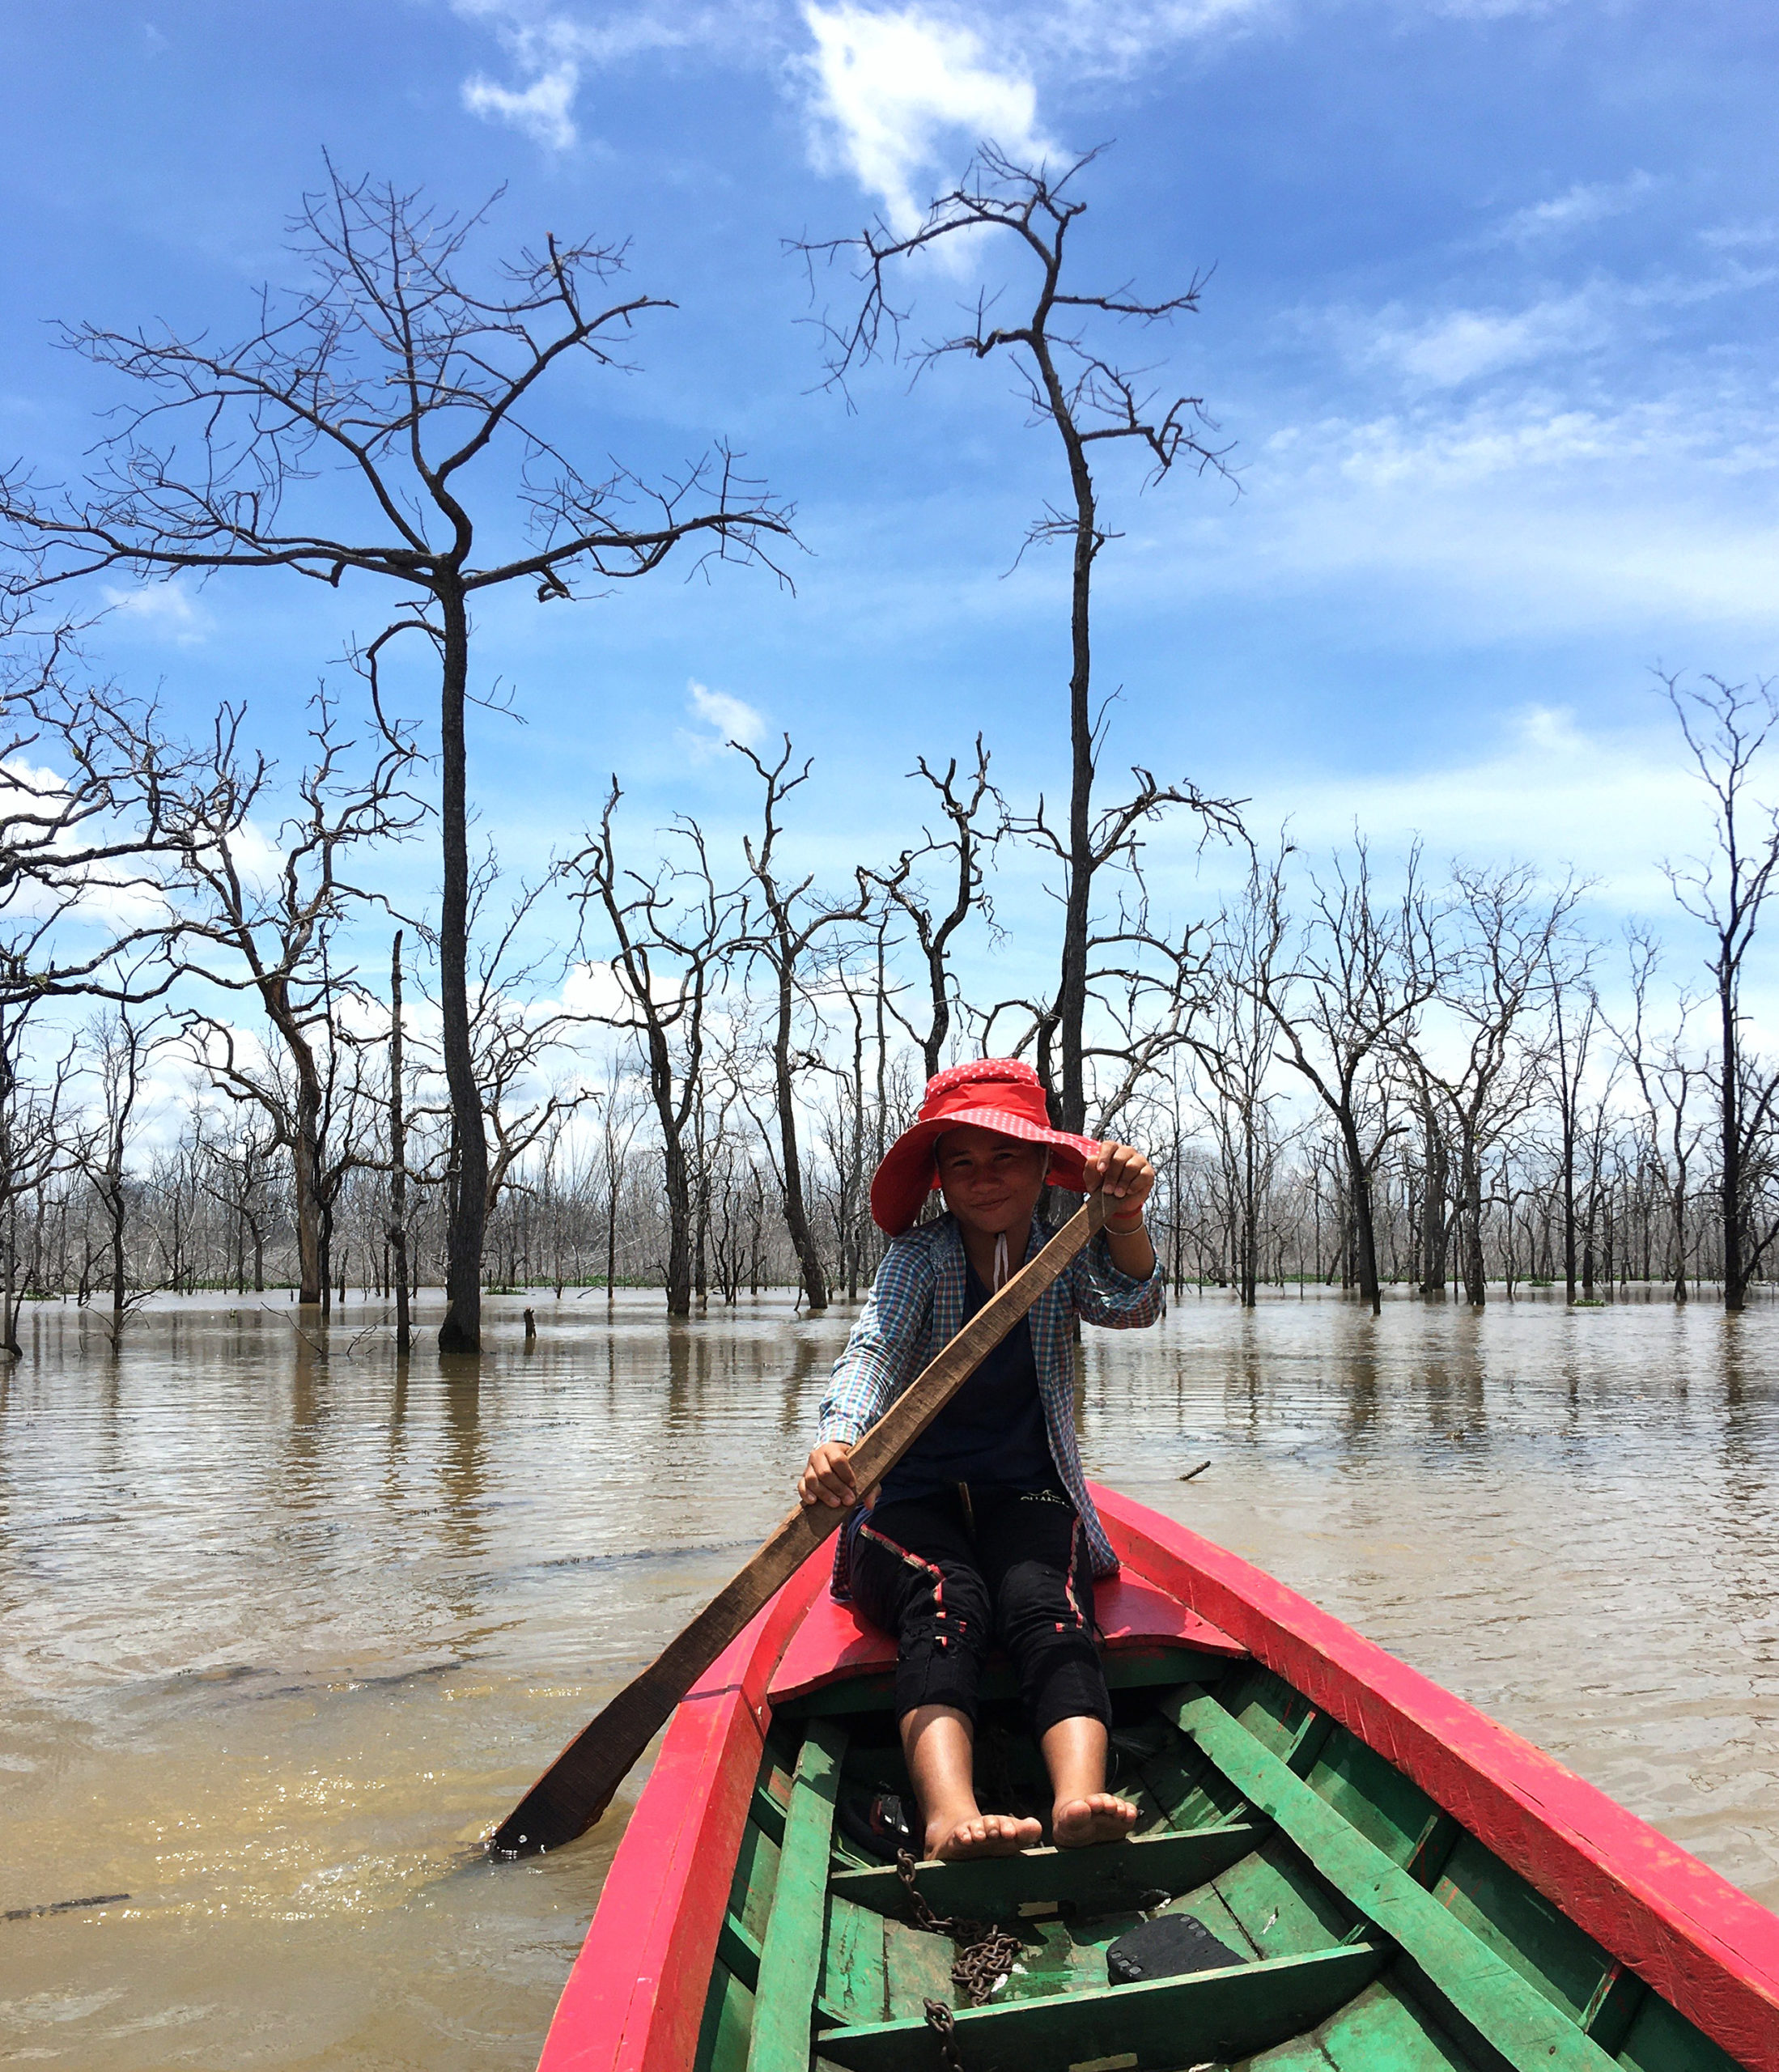 woman paddled boat through area flooded by lower sesan dam, cambodia